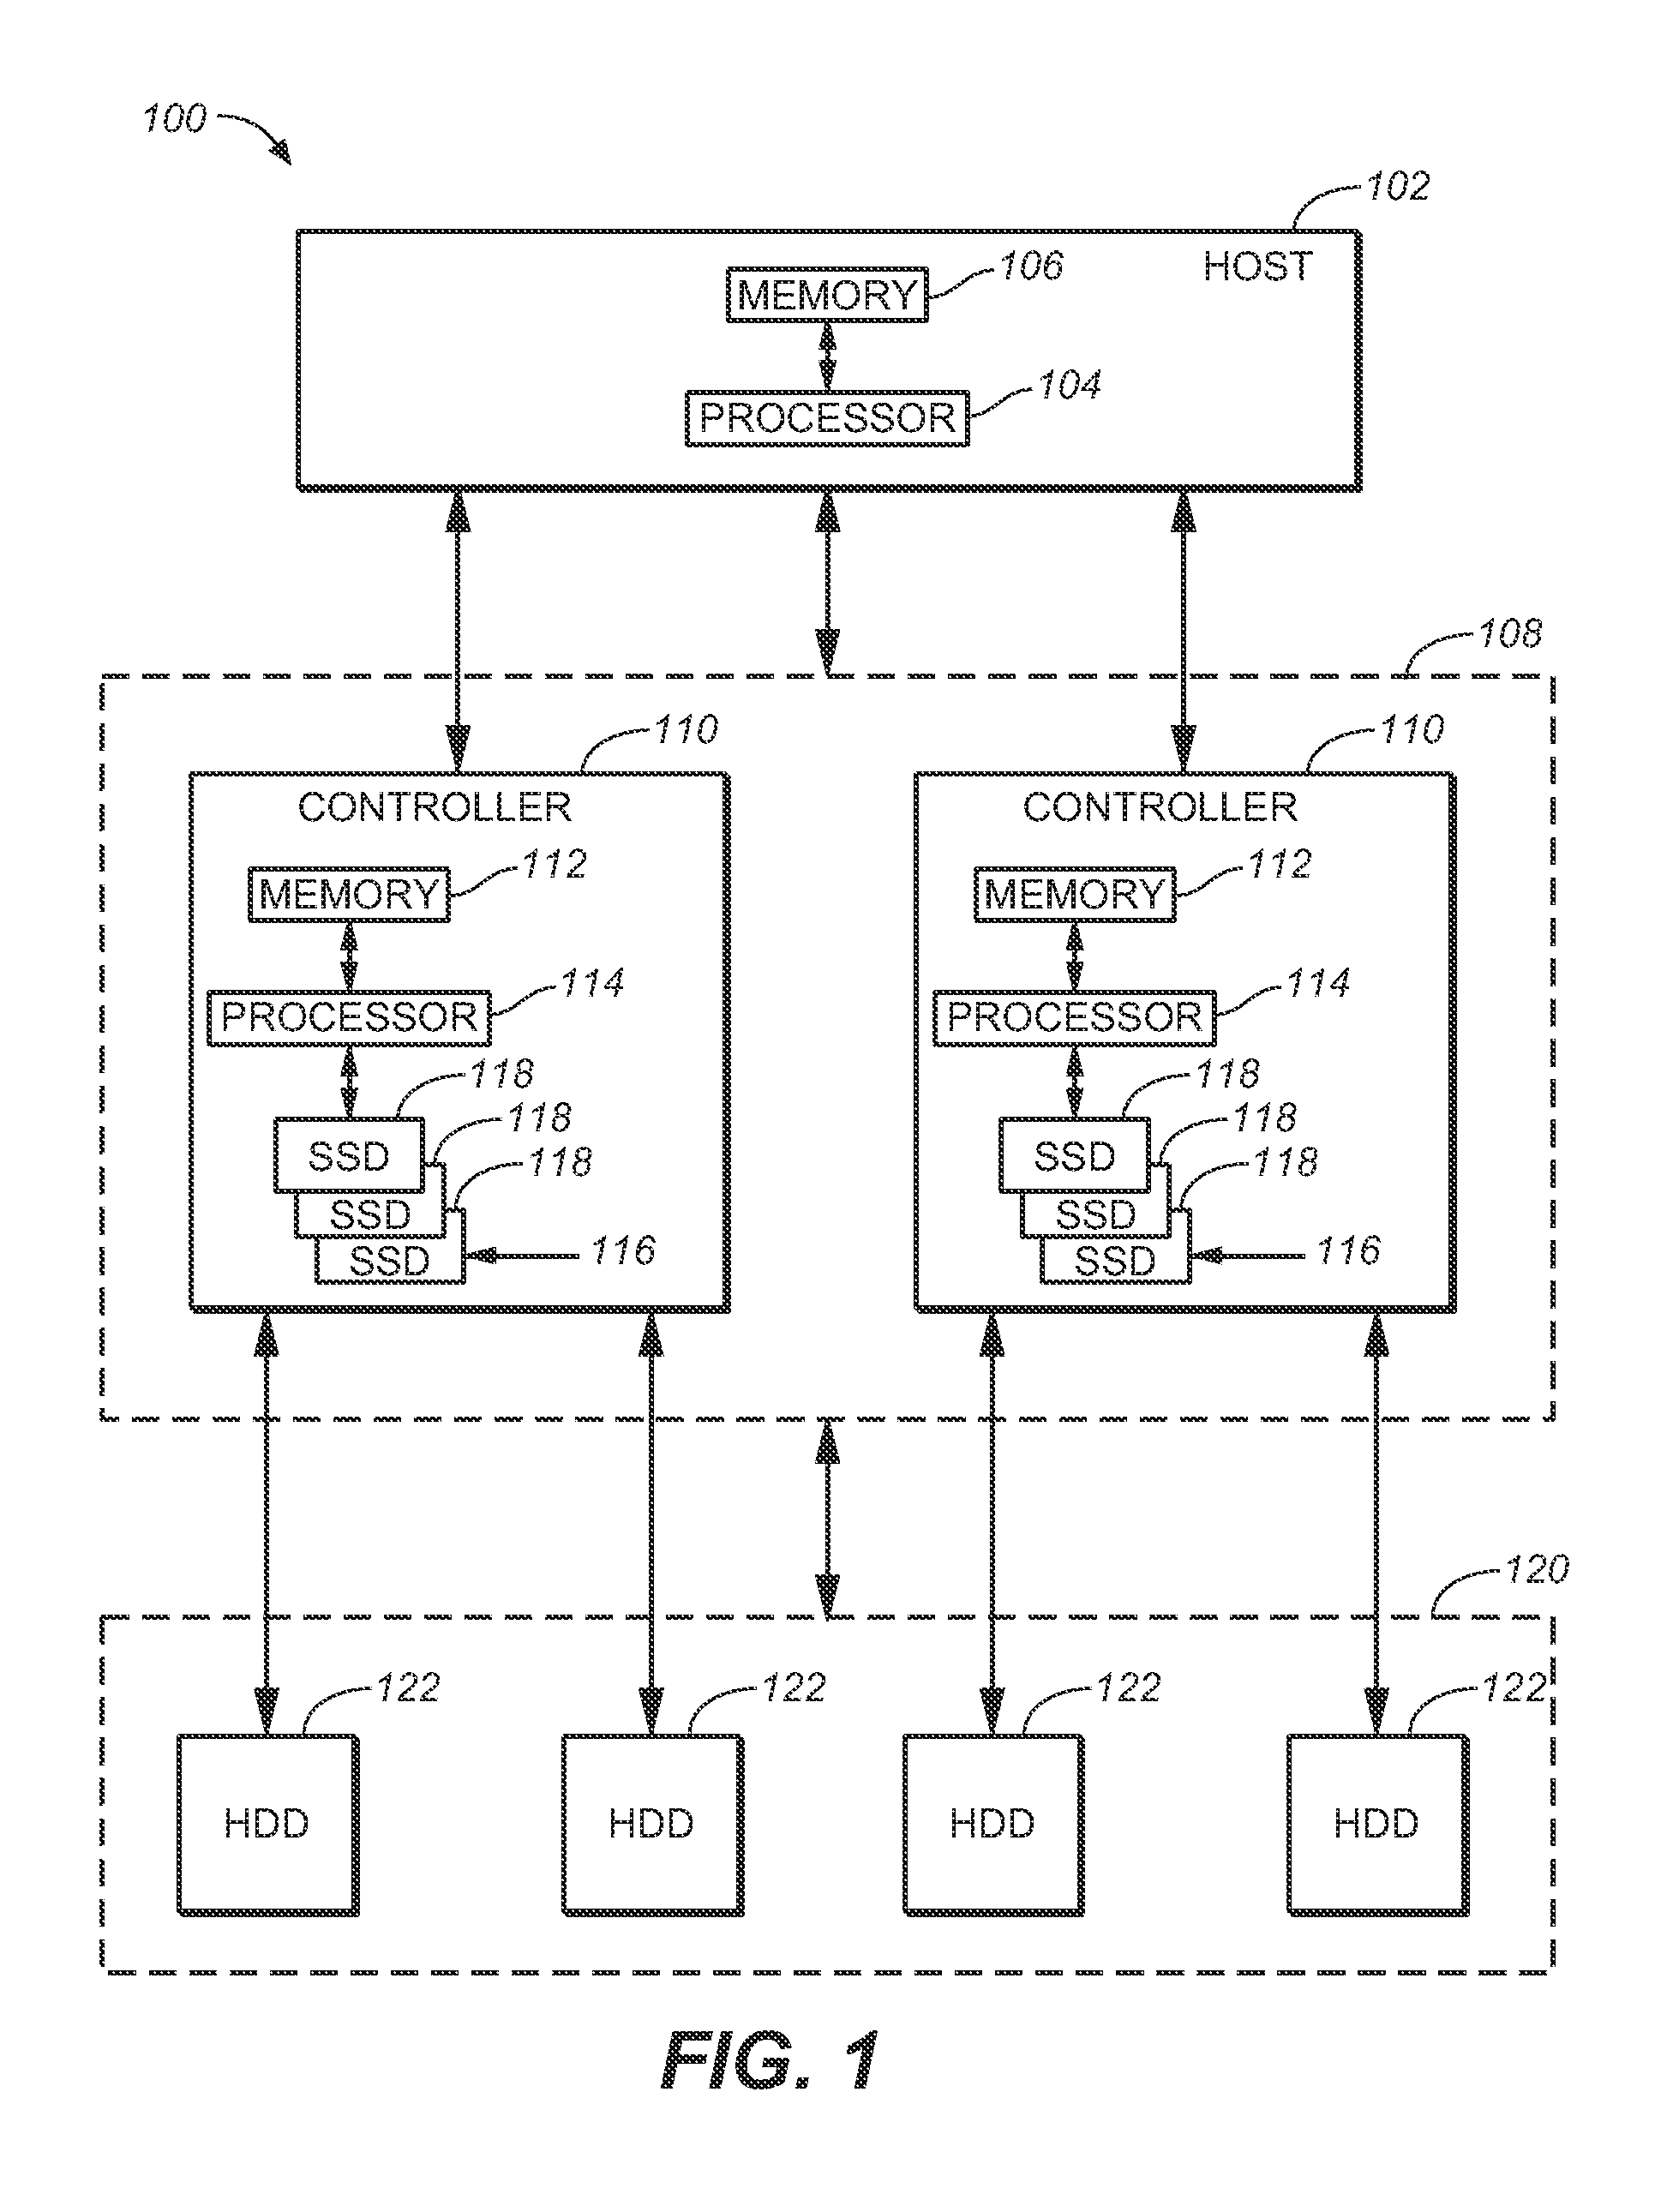 System and method for optimizing thermal management for a storage controller cache